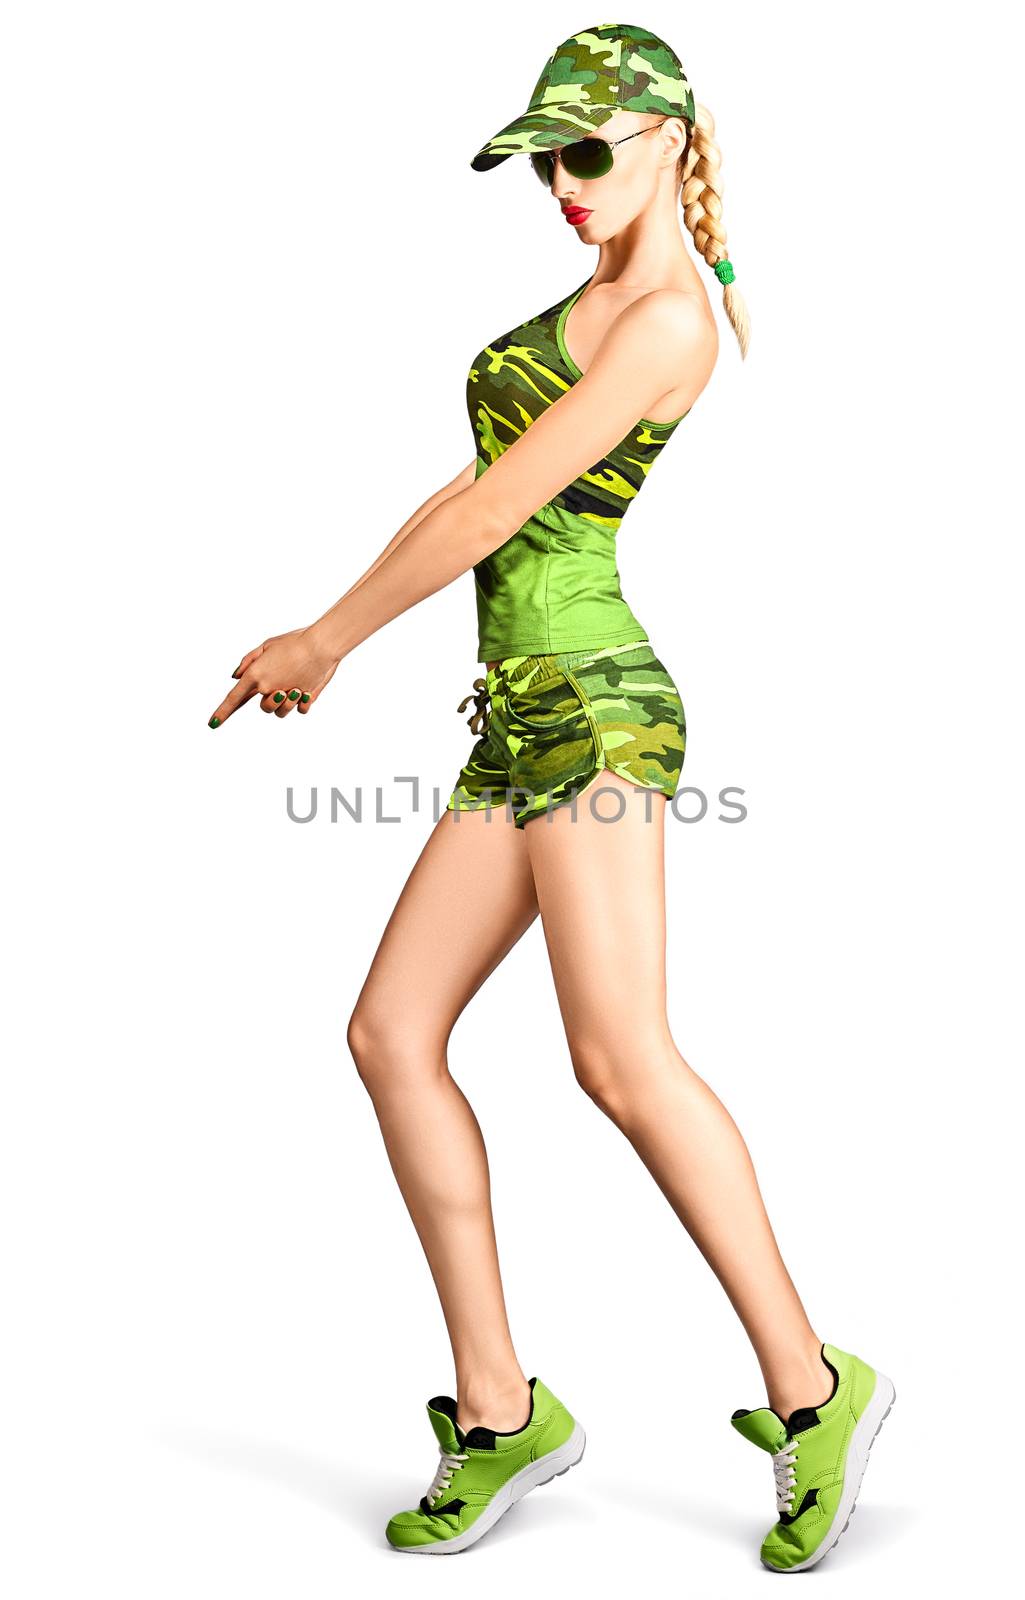 Fashion woman camouflage clothes doing gun gesture by 918